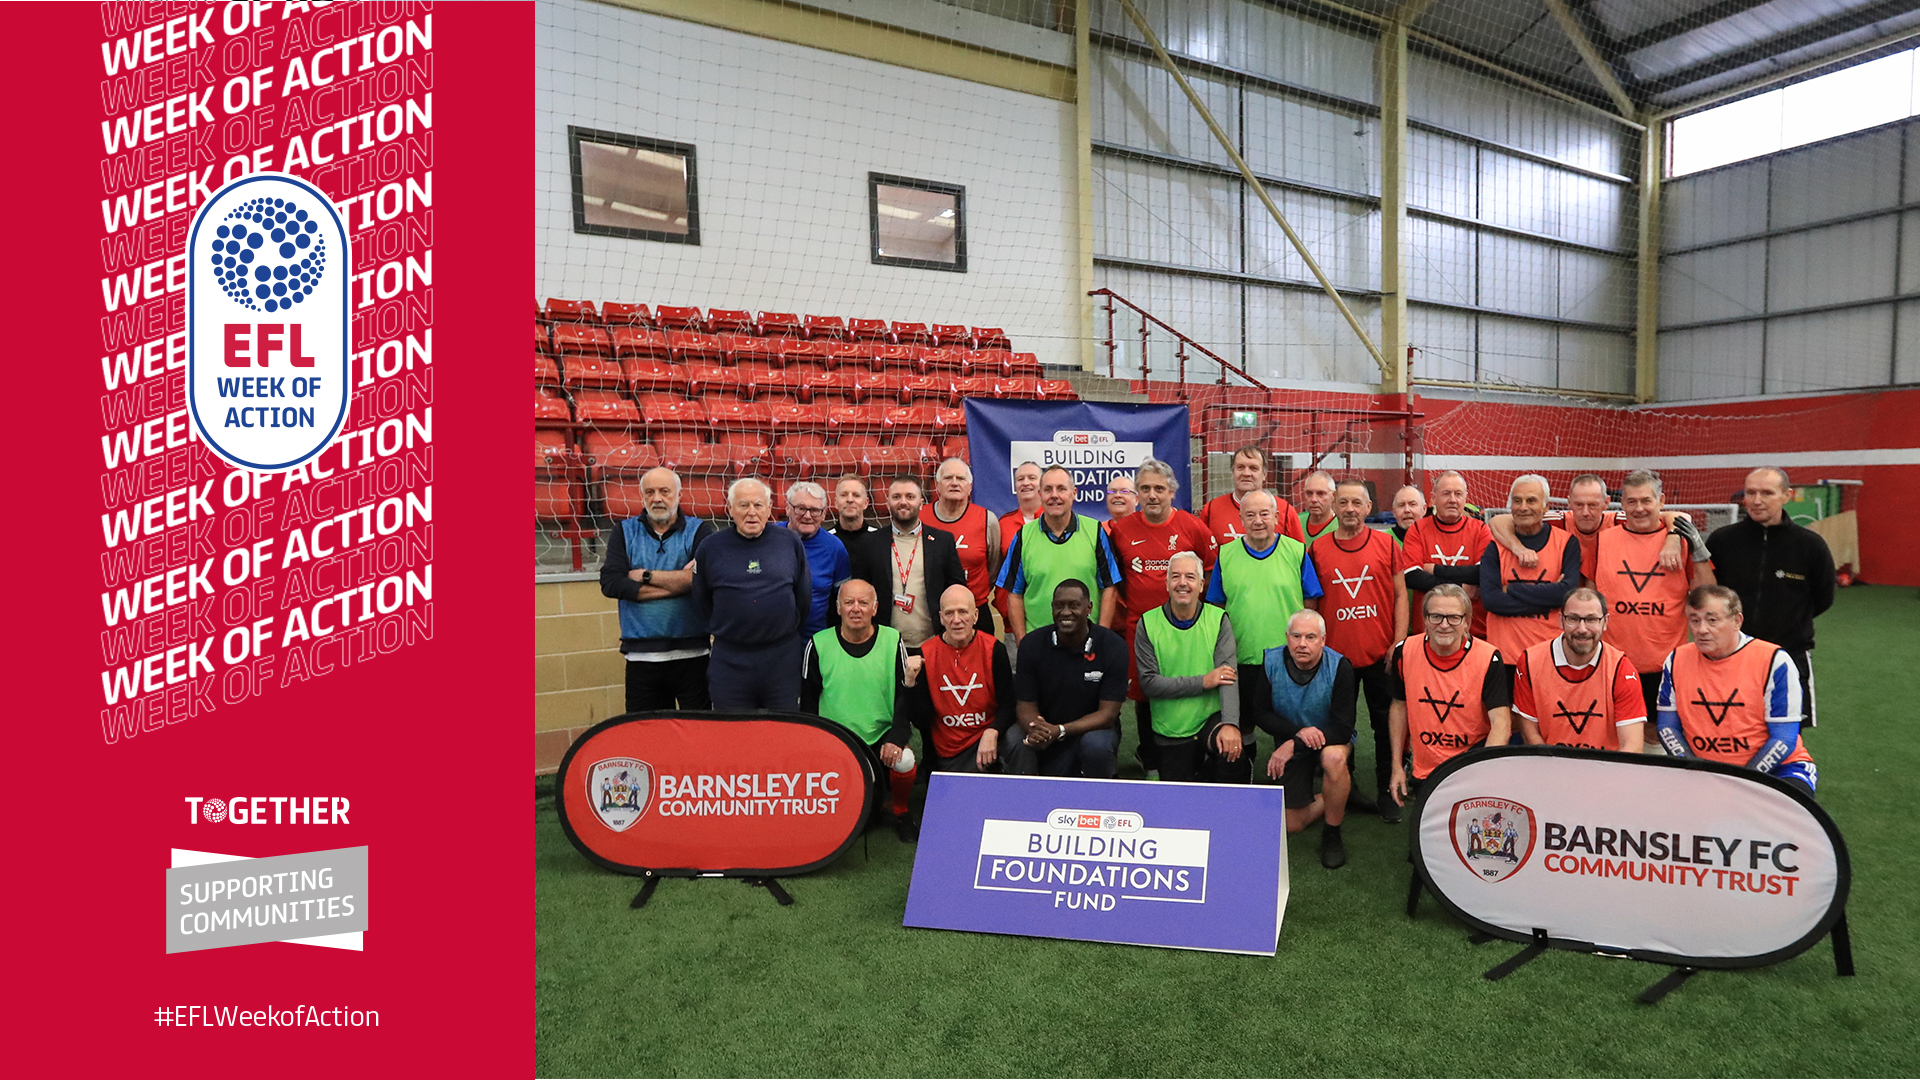 Barnsley FC Host ‘Building Foundations’ Football Fund Launch Event this EFL Week of Action